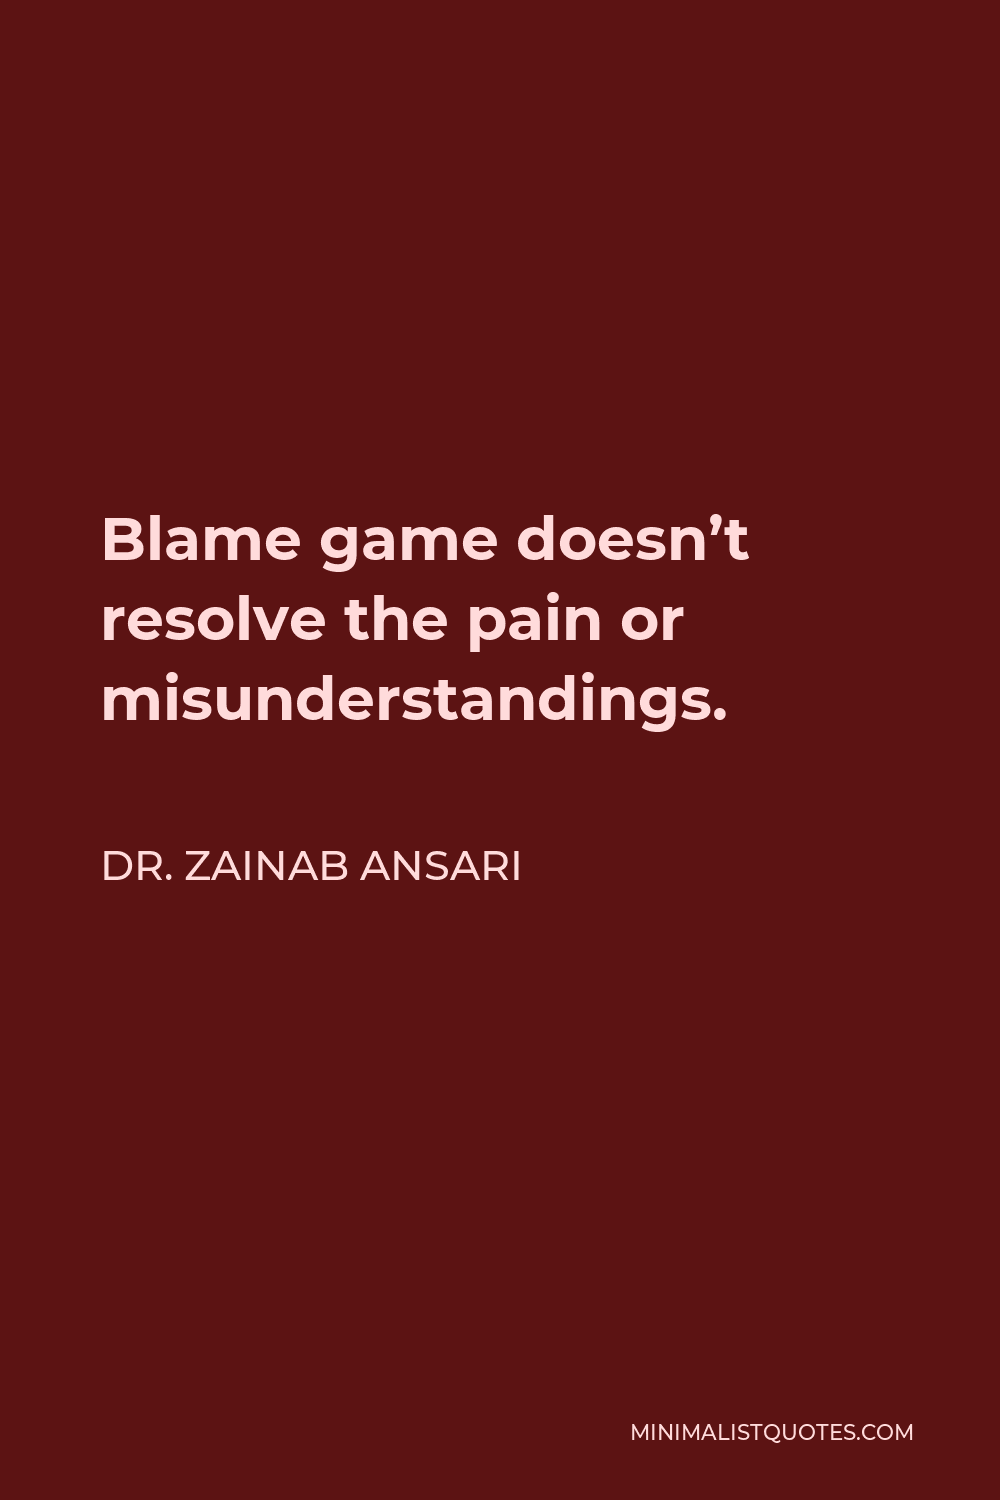 Dr. Zainab Ansari Quote - Blame game doesn’t resolve the pain or misunderstandings.